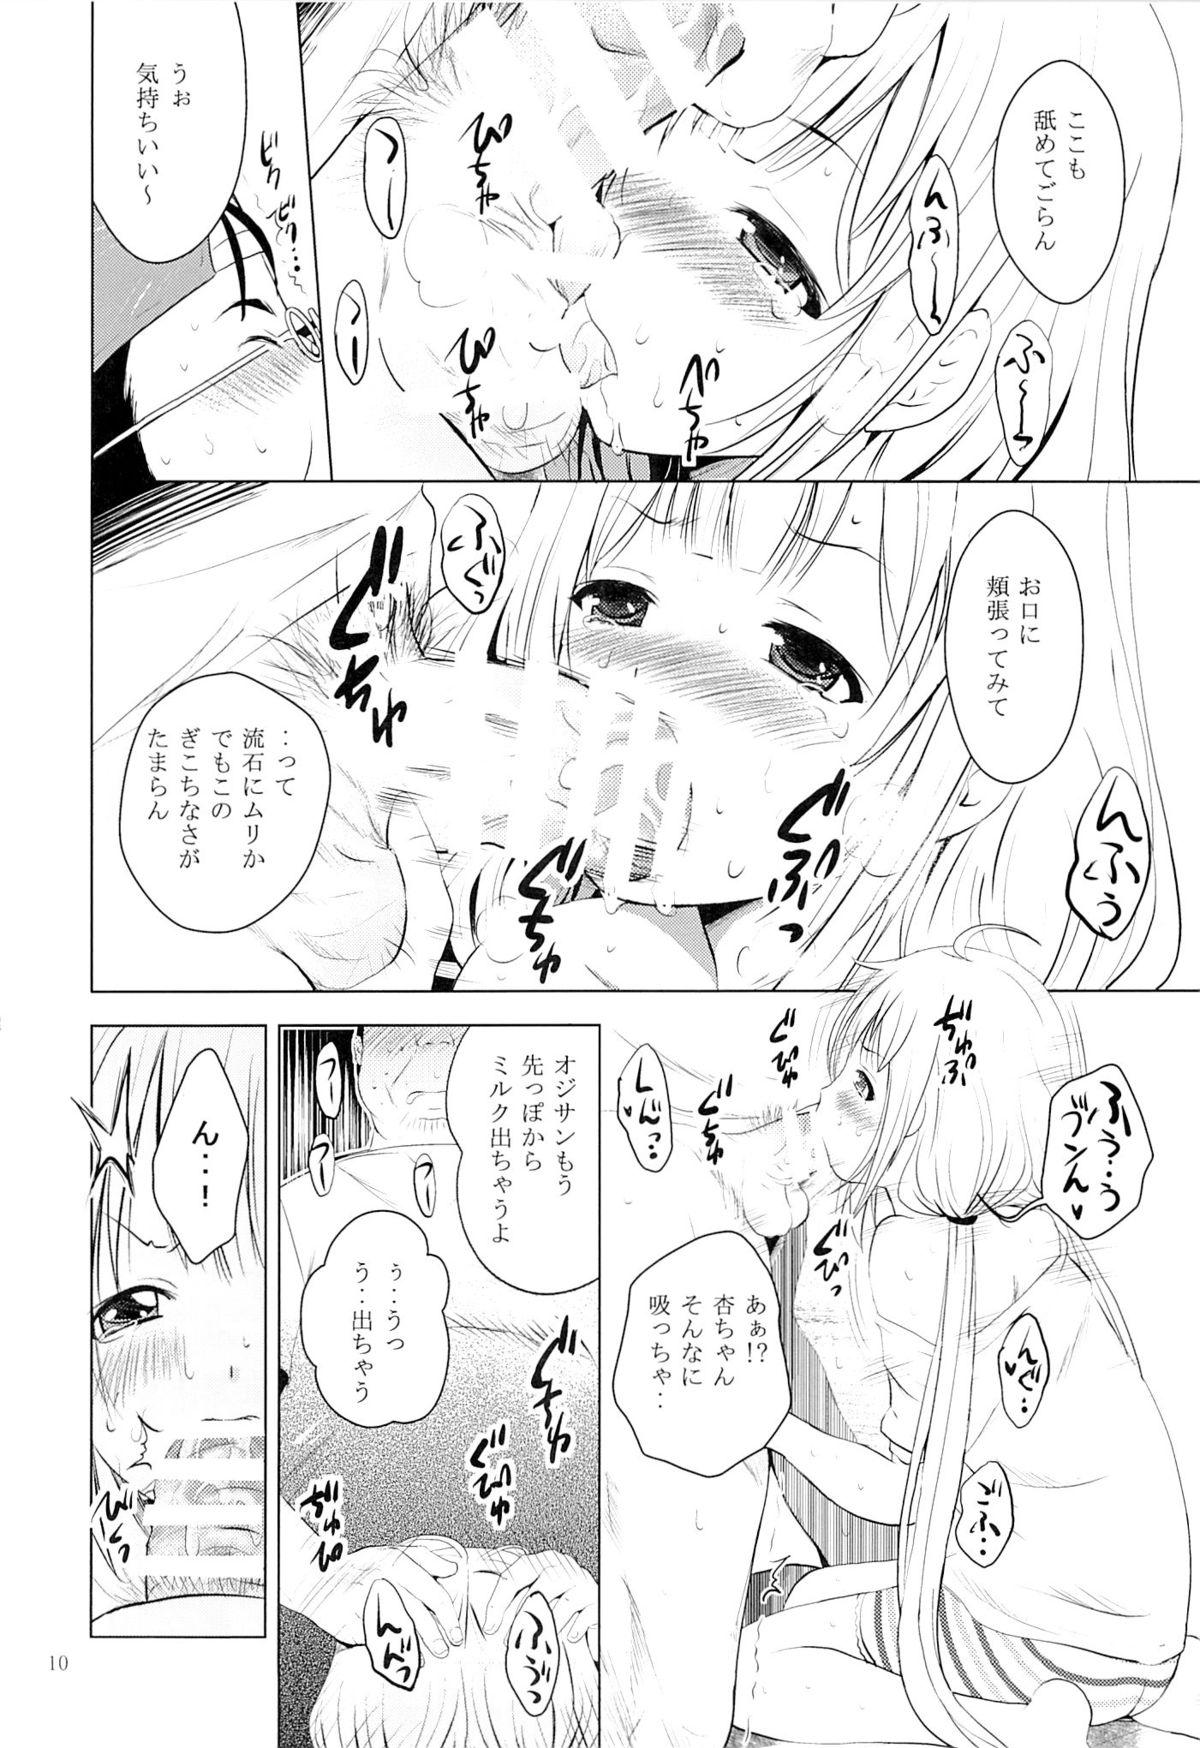 Bald Pussy MOUSOU Mini Theater 37 - The idolmaster Free Hardcore Porn - Page 9